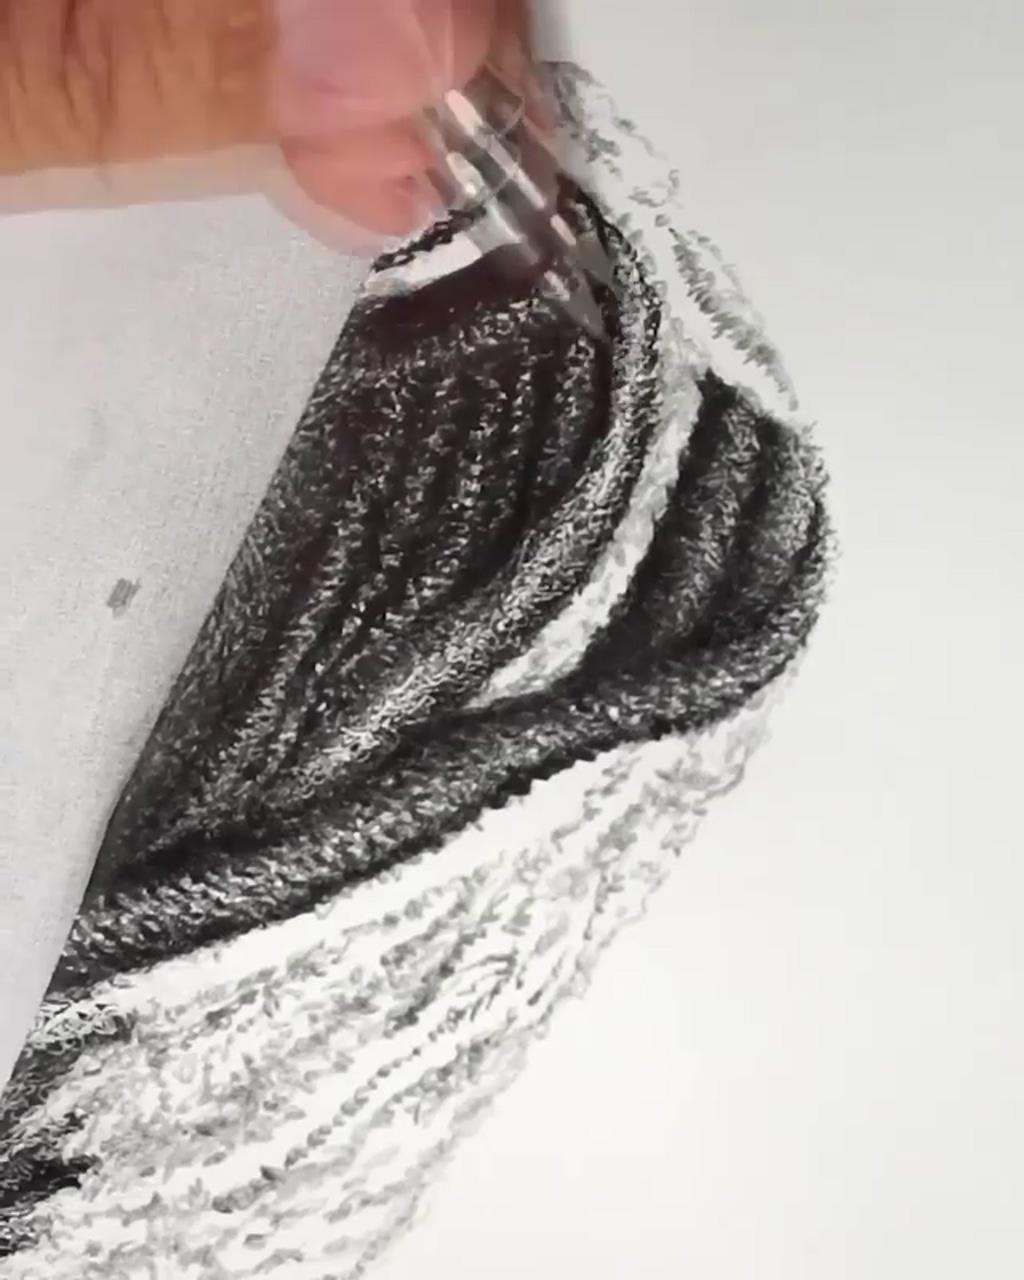 Charcoal drawing | how to draw realistic eye _great art by fundara on tiktok